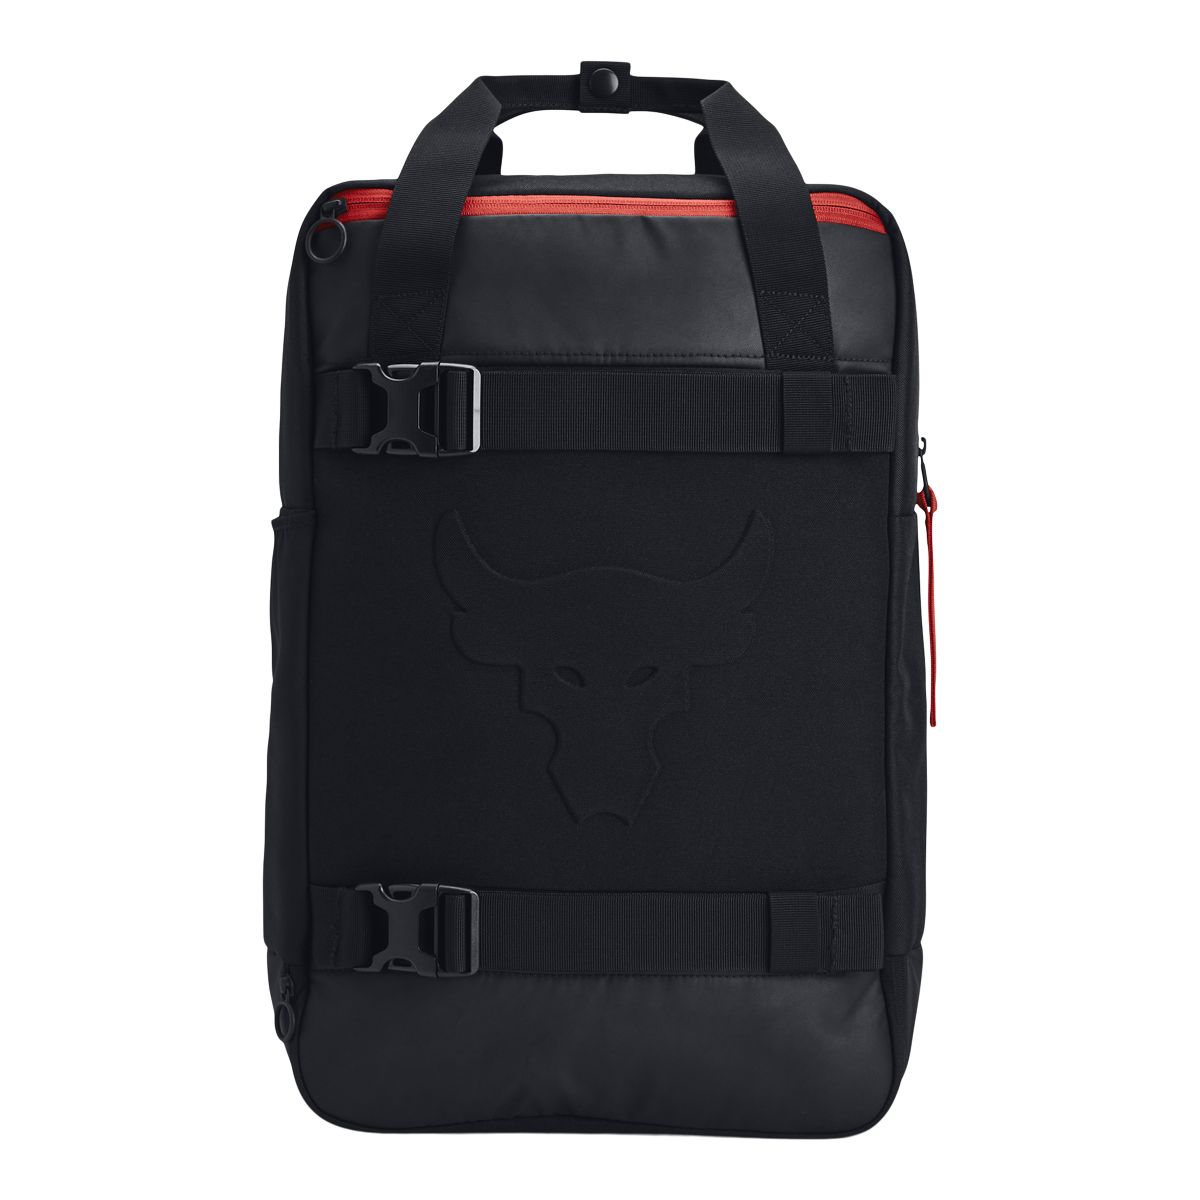 Under Armour Project Rock Box Duffle Backpack - Black, Osfm